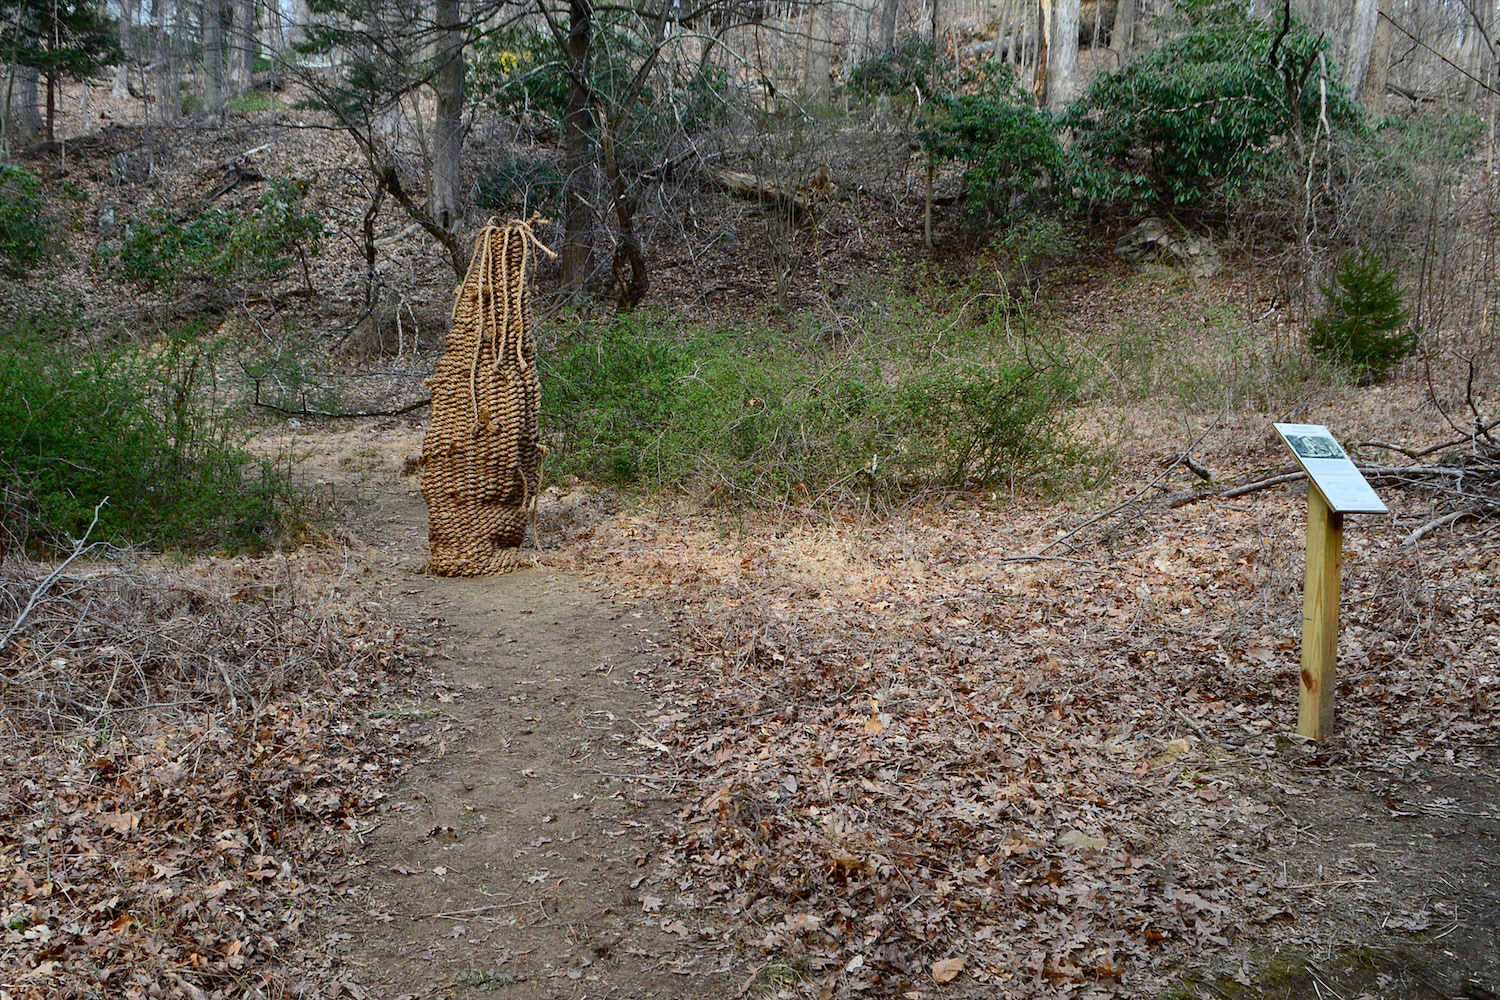 Extending from the frame's bottom edge, a path in the woods veers off slightly to the left. To its right, near the bottom right hand corner, is a informational plaque planted into the ground with a wooden base. This is one of the latter stops on the historical 